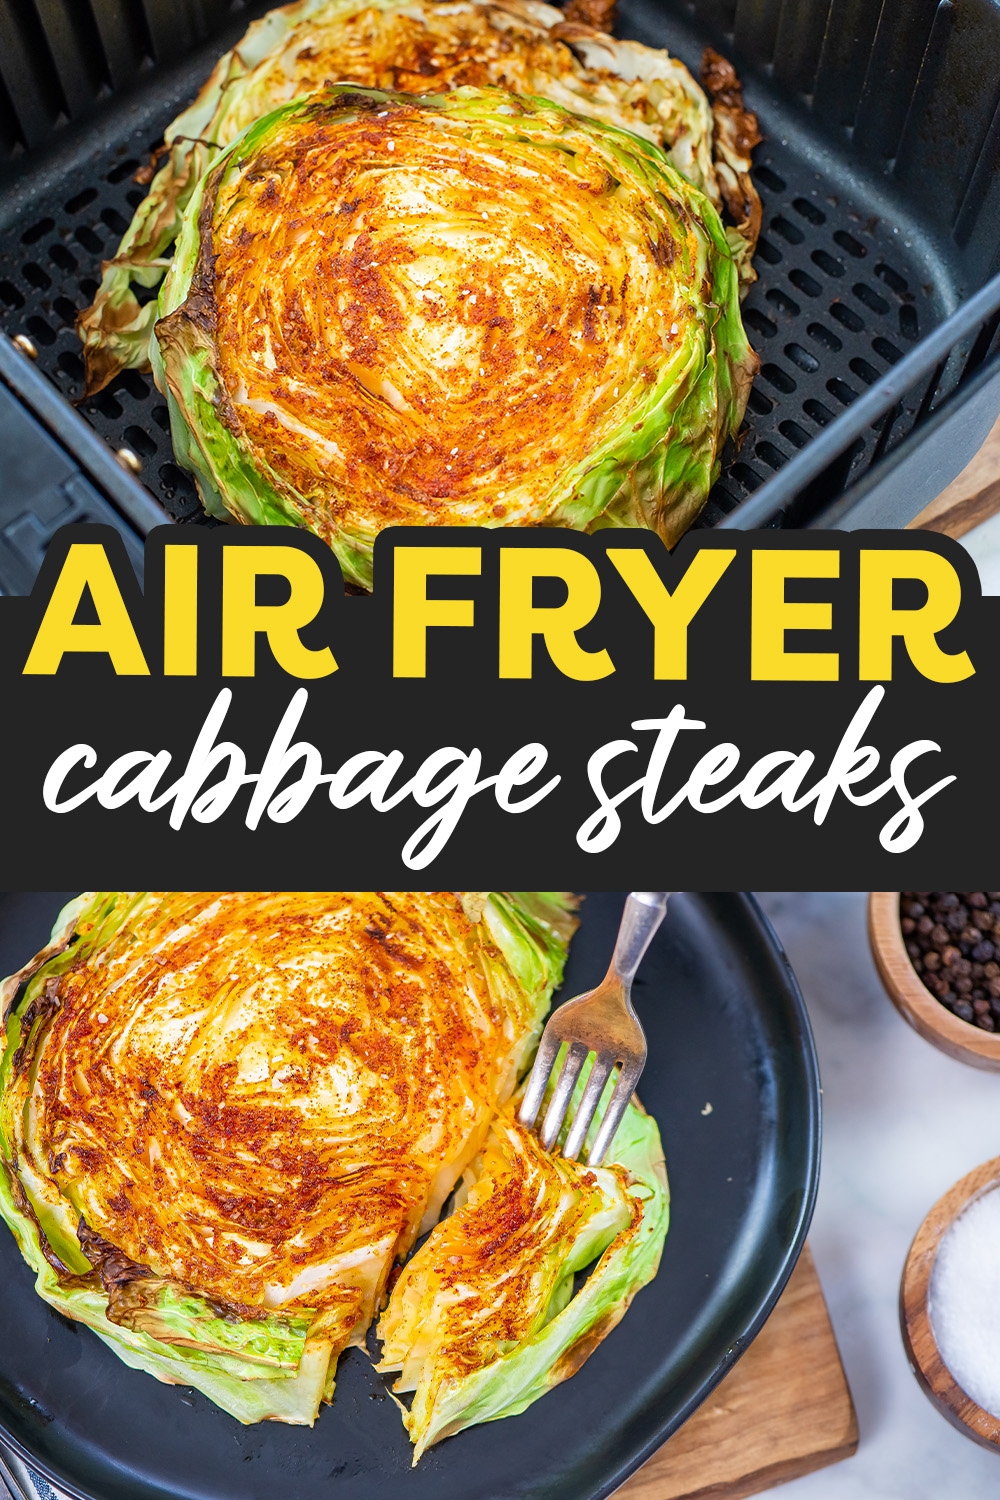 These air fryer cabbage steaks are a savory treat!  Use them as a side dish or even a main course for a light lunch!